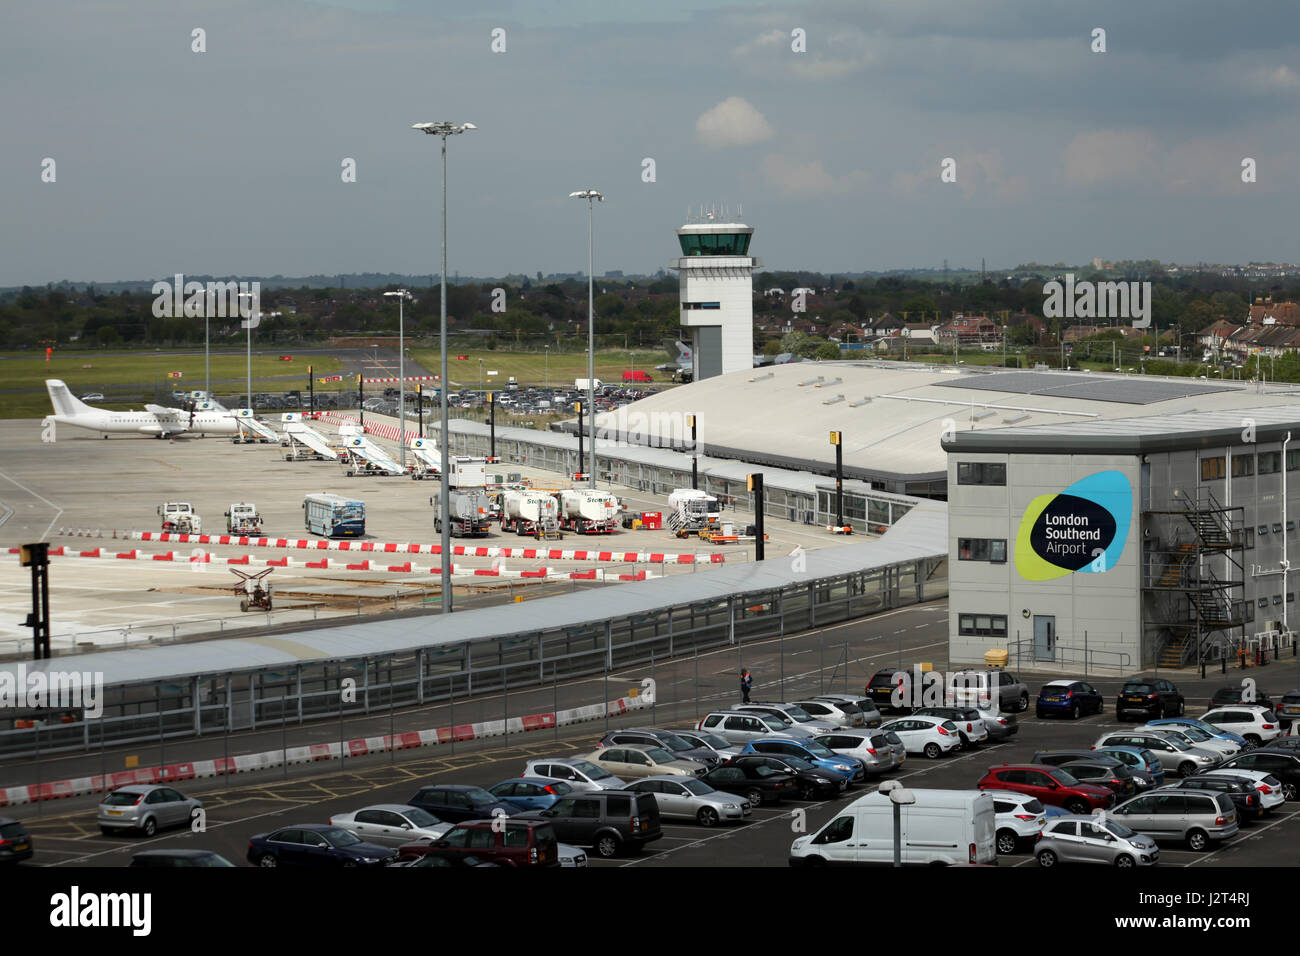 Southend, Essex, 29 Apr 2017 - Southend Airport Stock Photo